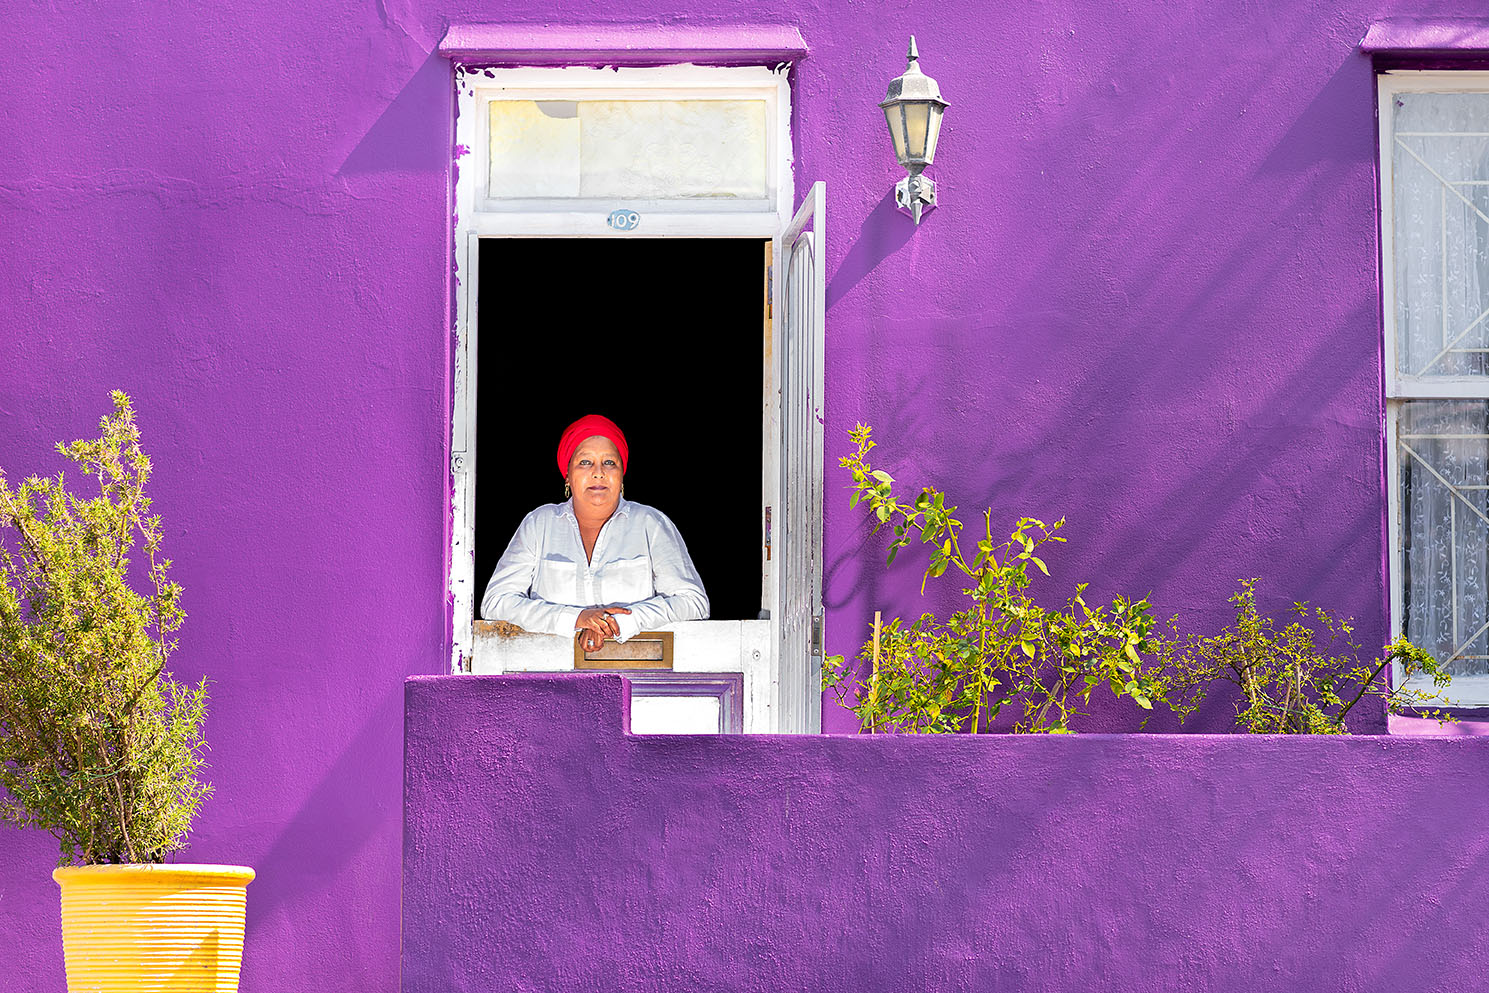 A woman standing in the doorway of a purple home